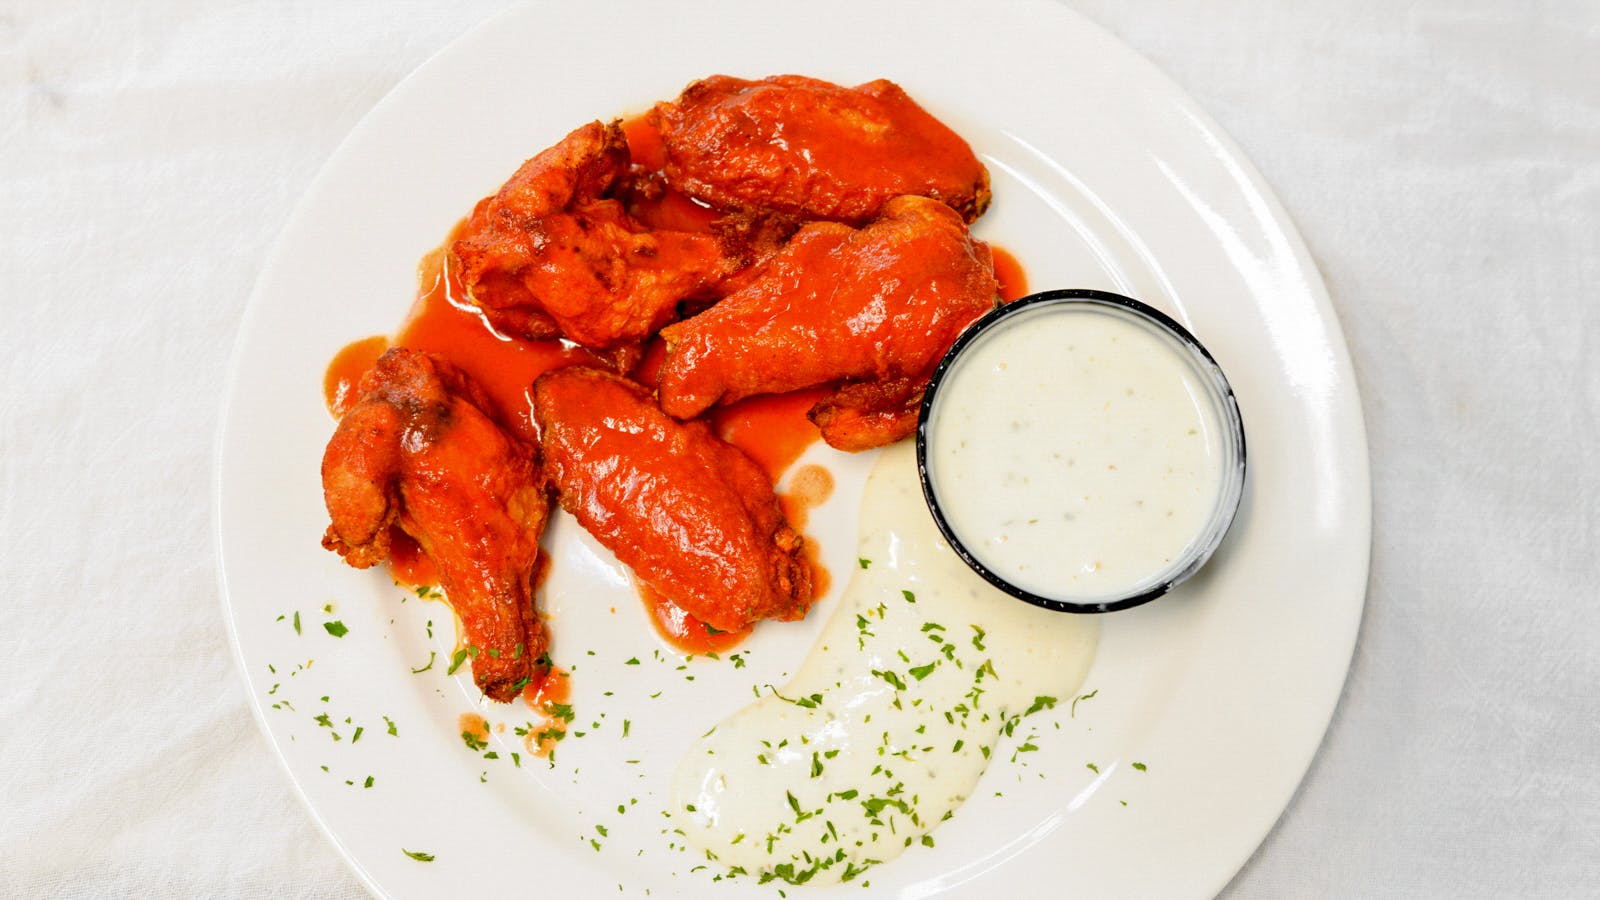 Buffalo Wings from Aroma Pizza & Pasta in Lake Forest, CA